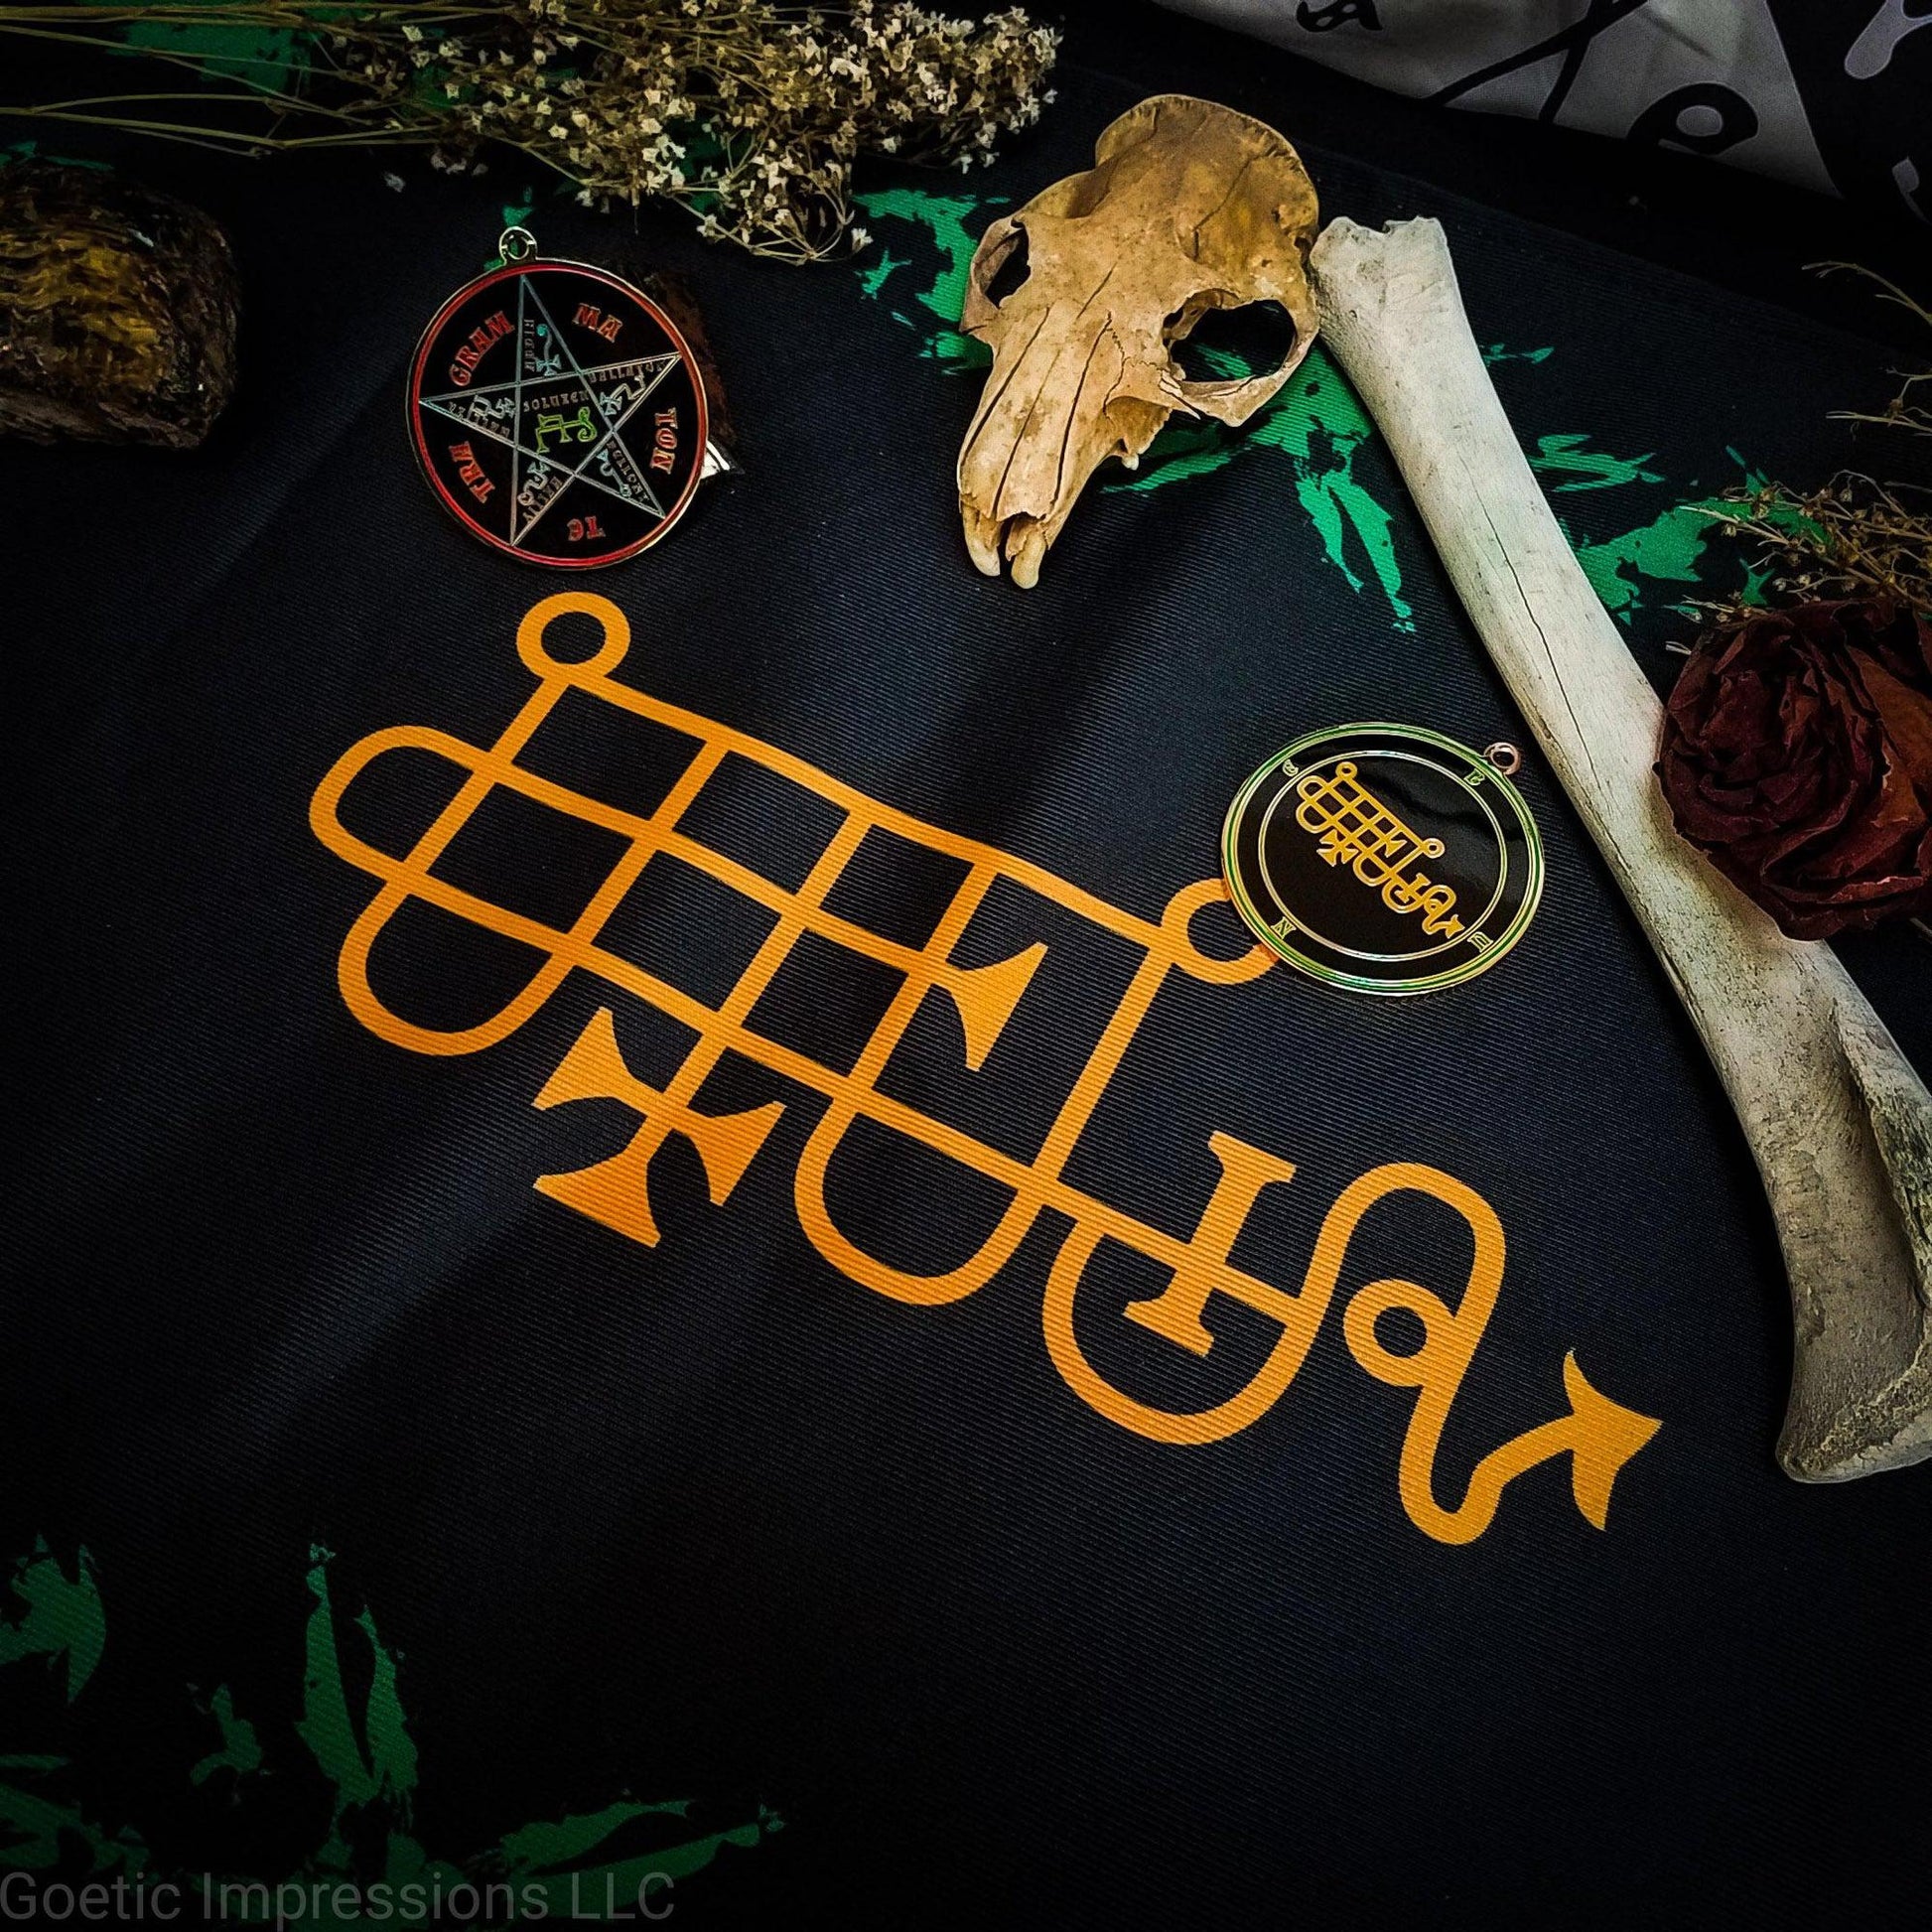 Orange and Green Bune Altar cloth for Goetic offerings or evocations.